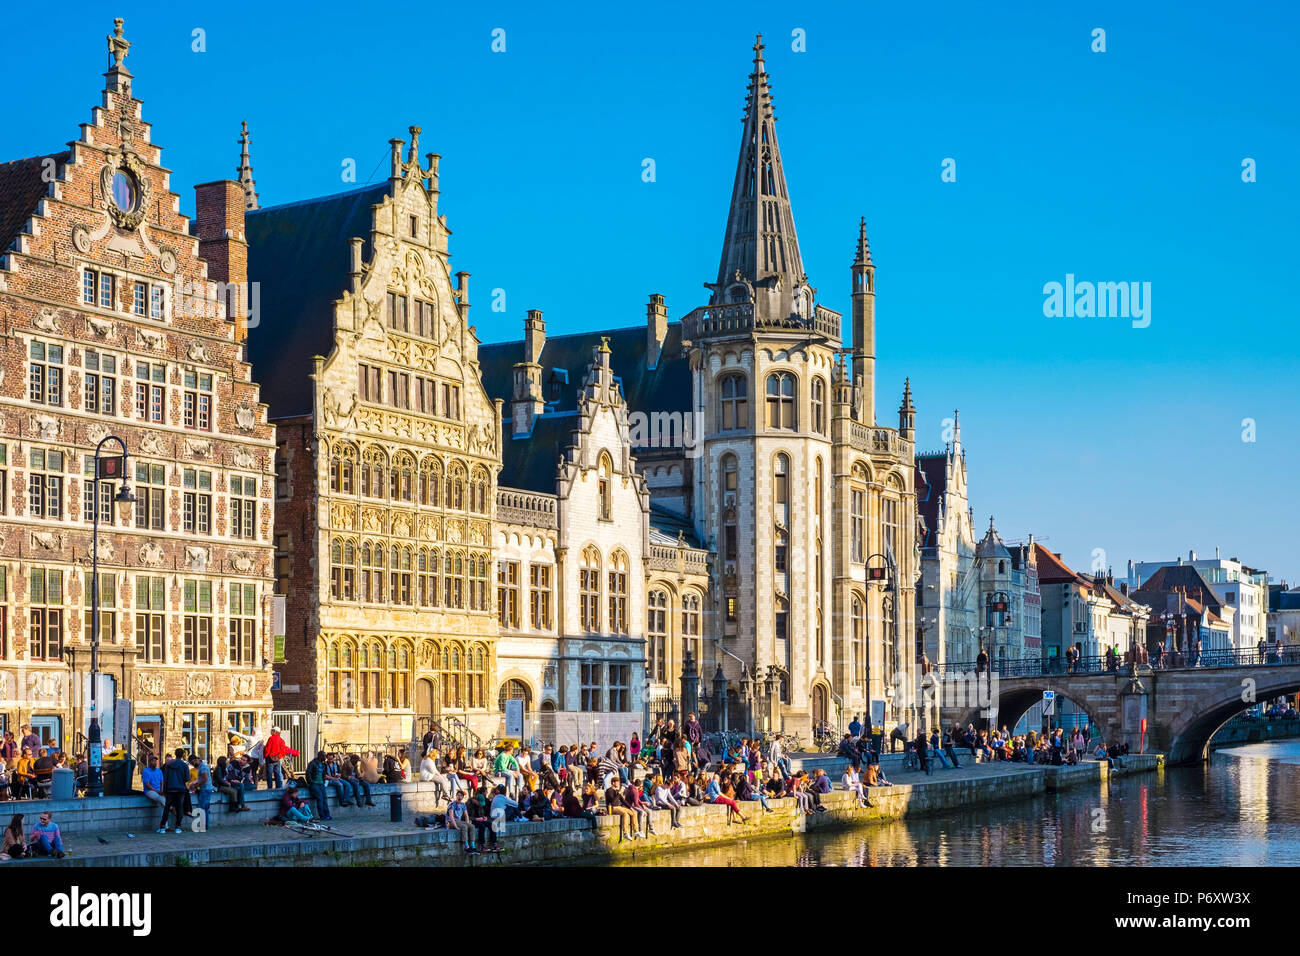 Belgium, Flanders, Ghent (Gent). Medieval guild houses on Graslei and the Leie River. Stock Photo